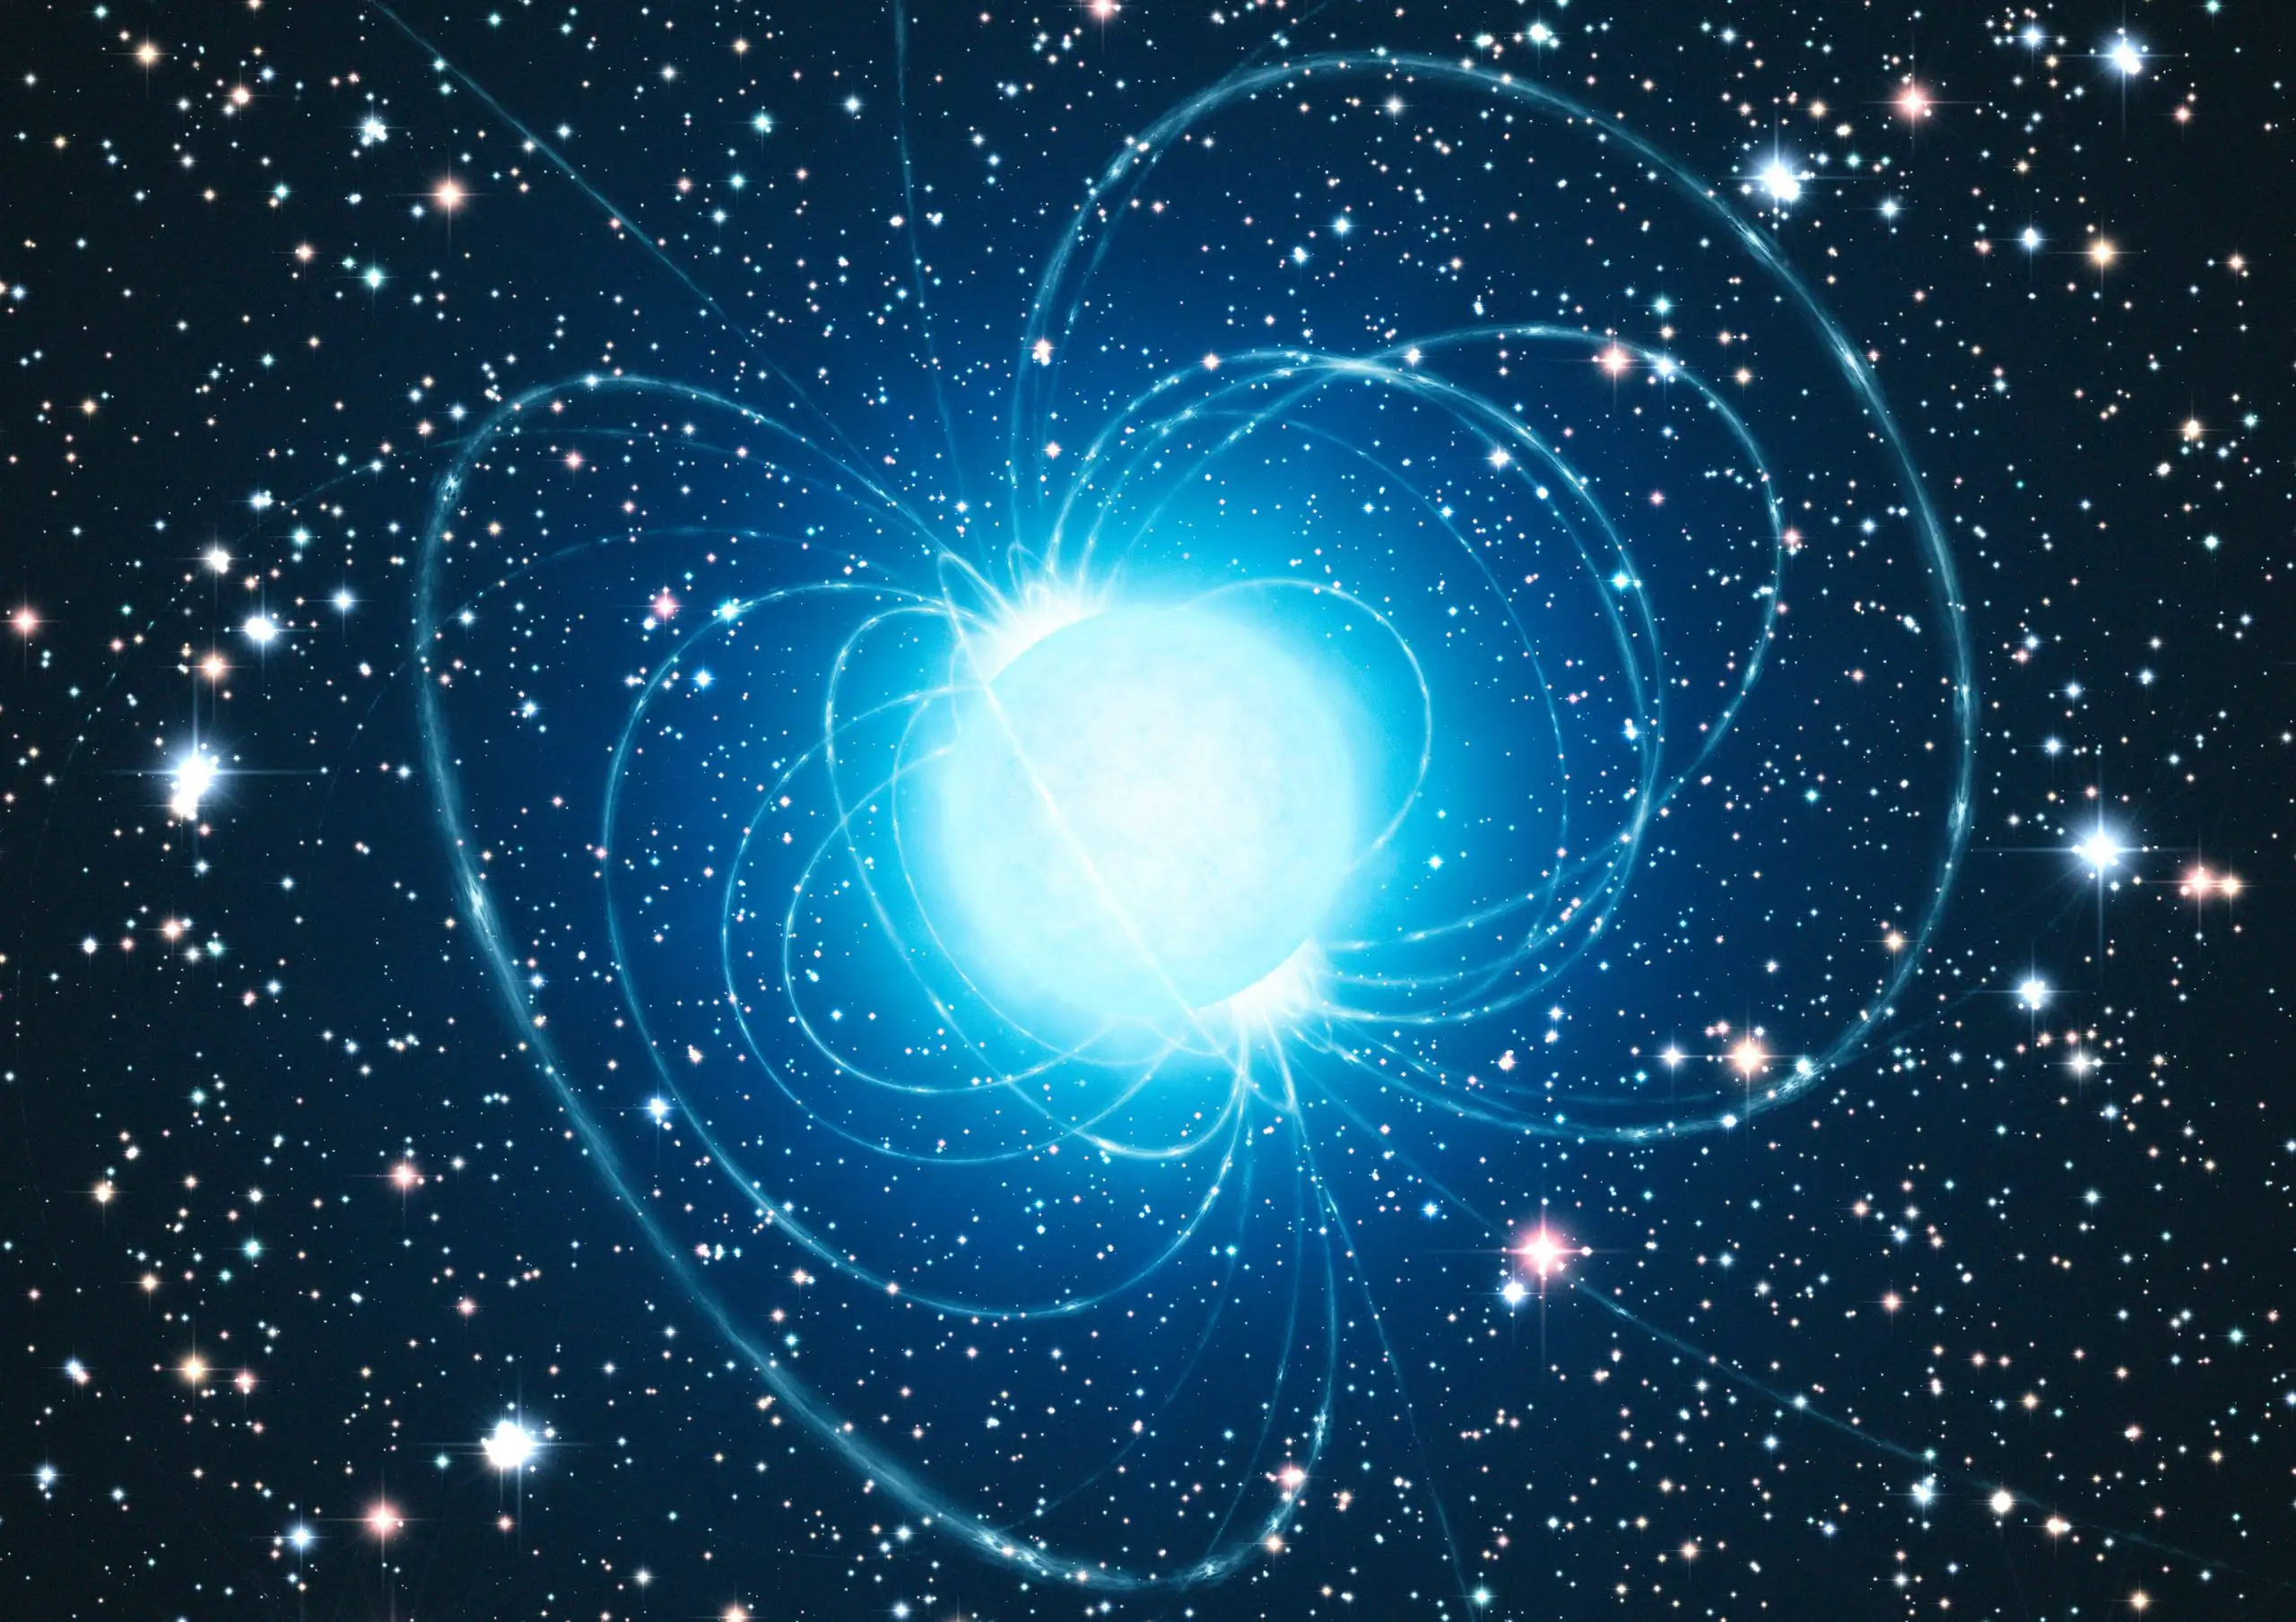 Chinese Astronomers Discover Nearest, Lightest Neutron Star Candidate